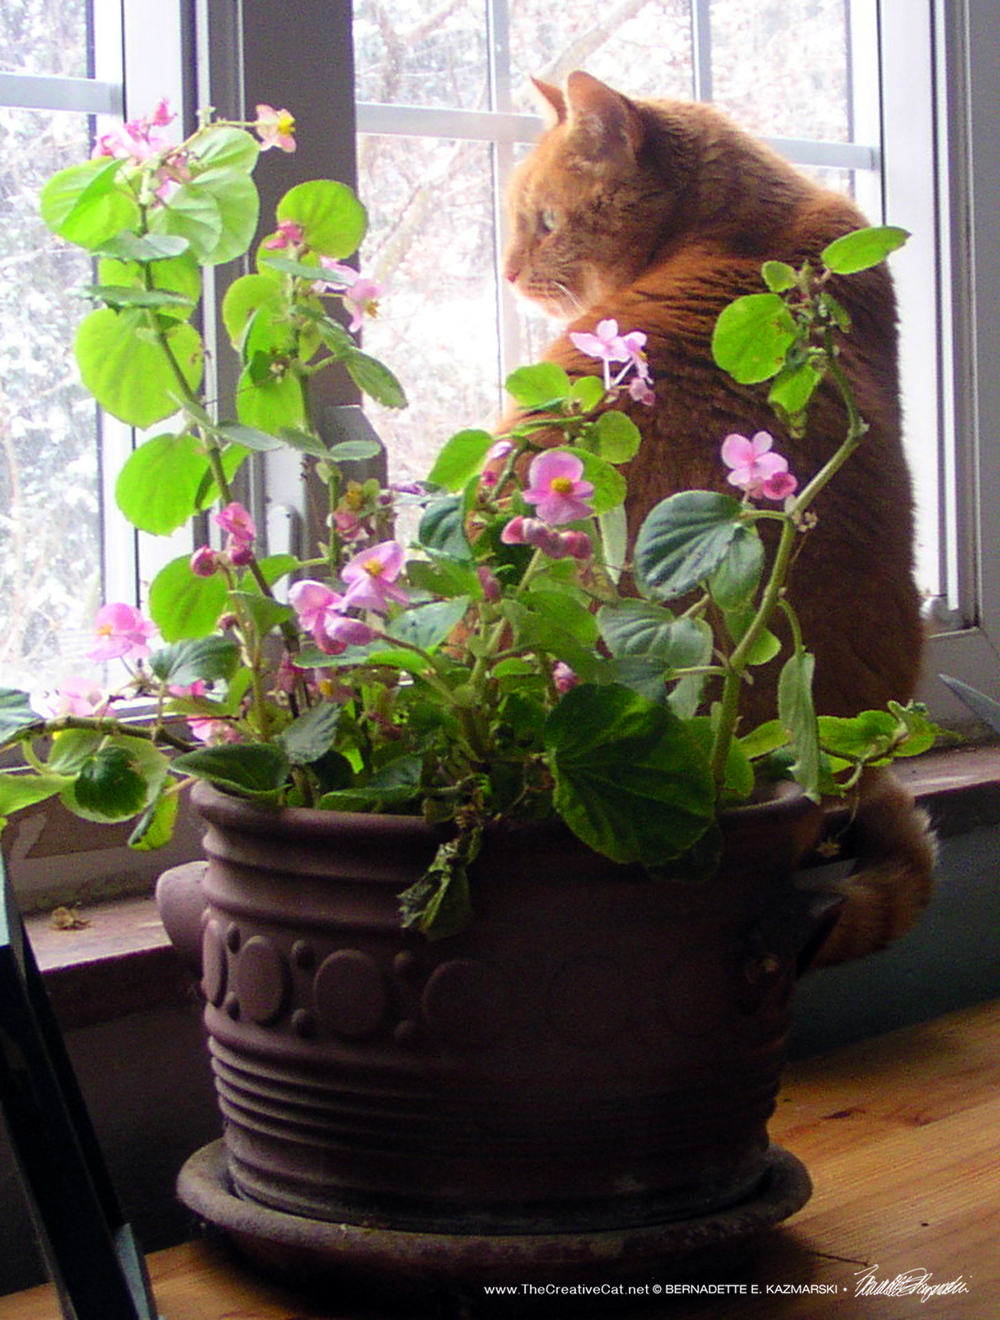 Mr. Peach with Begonias.